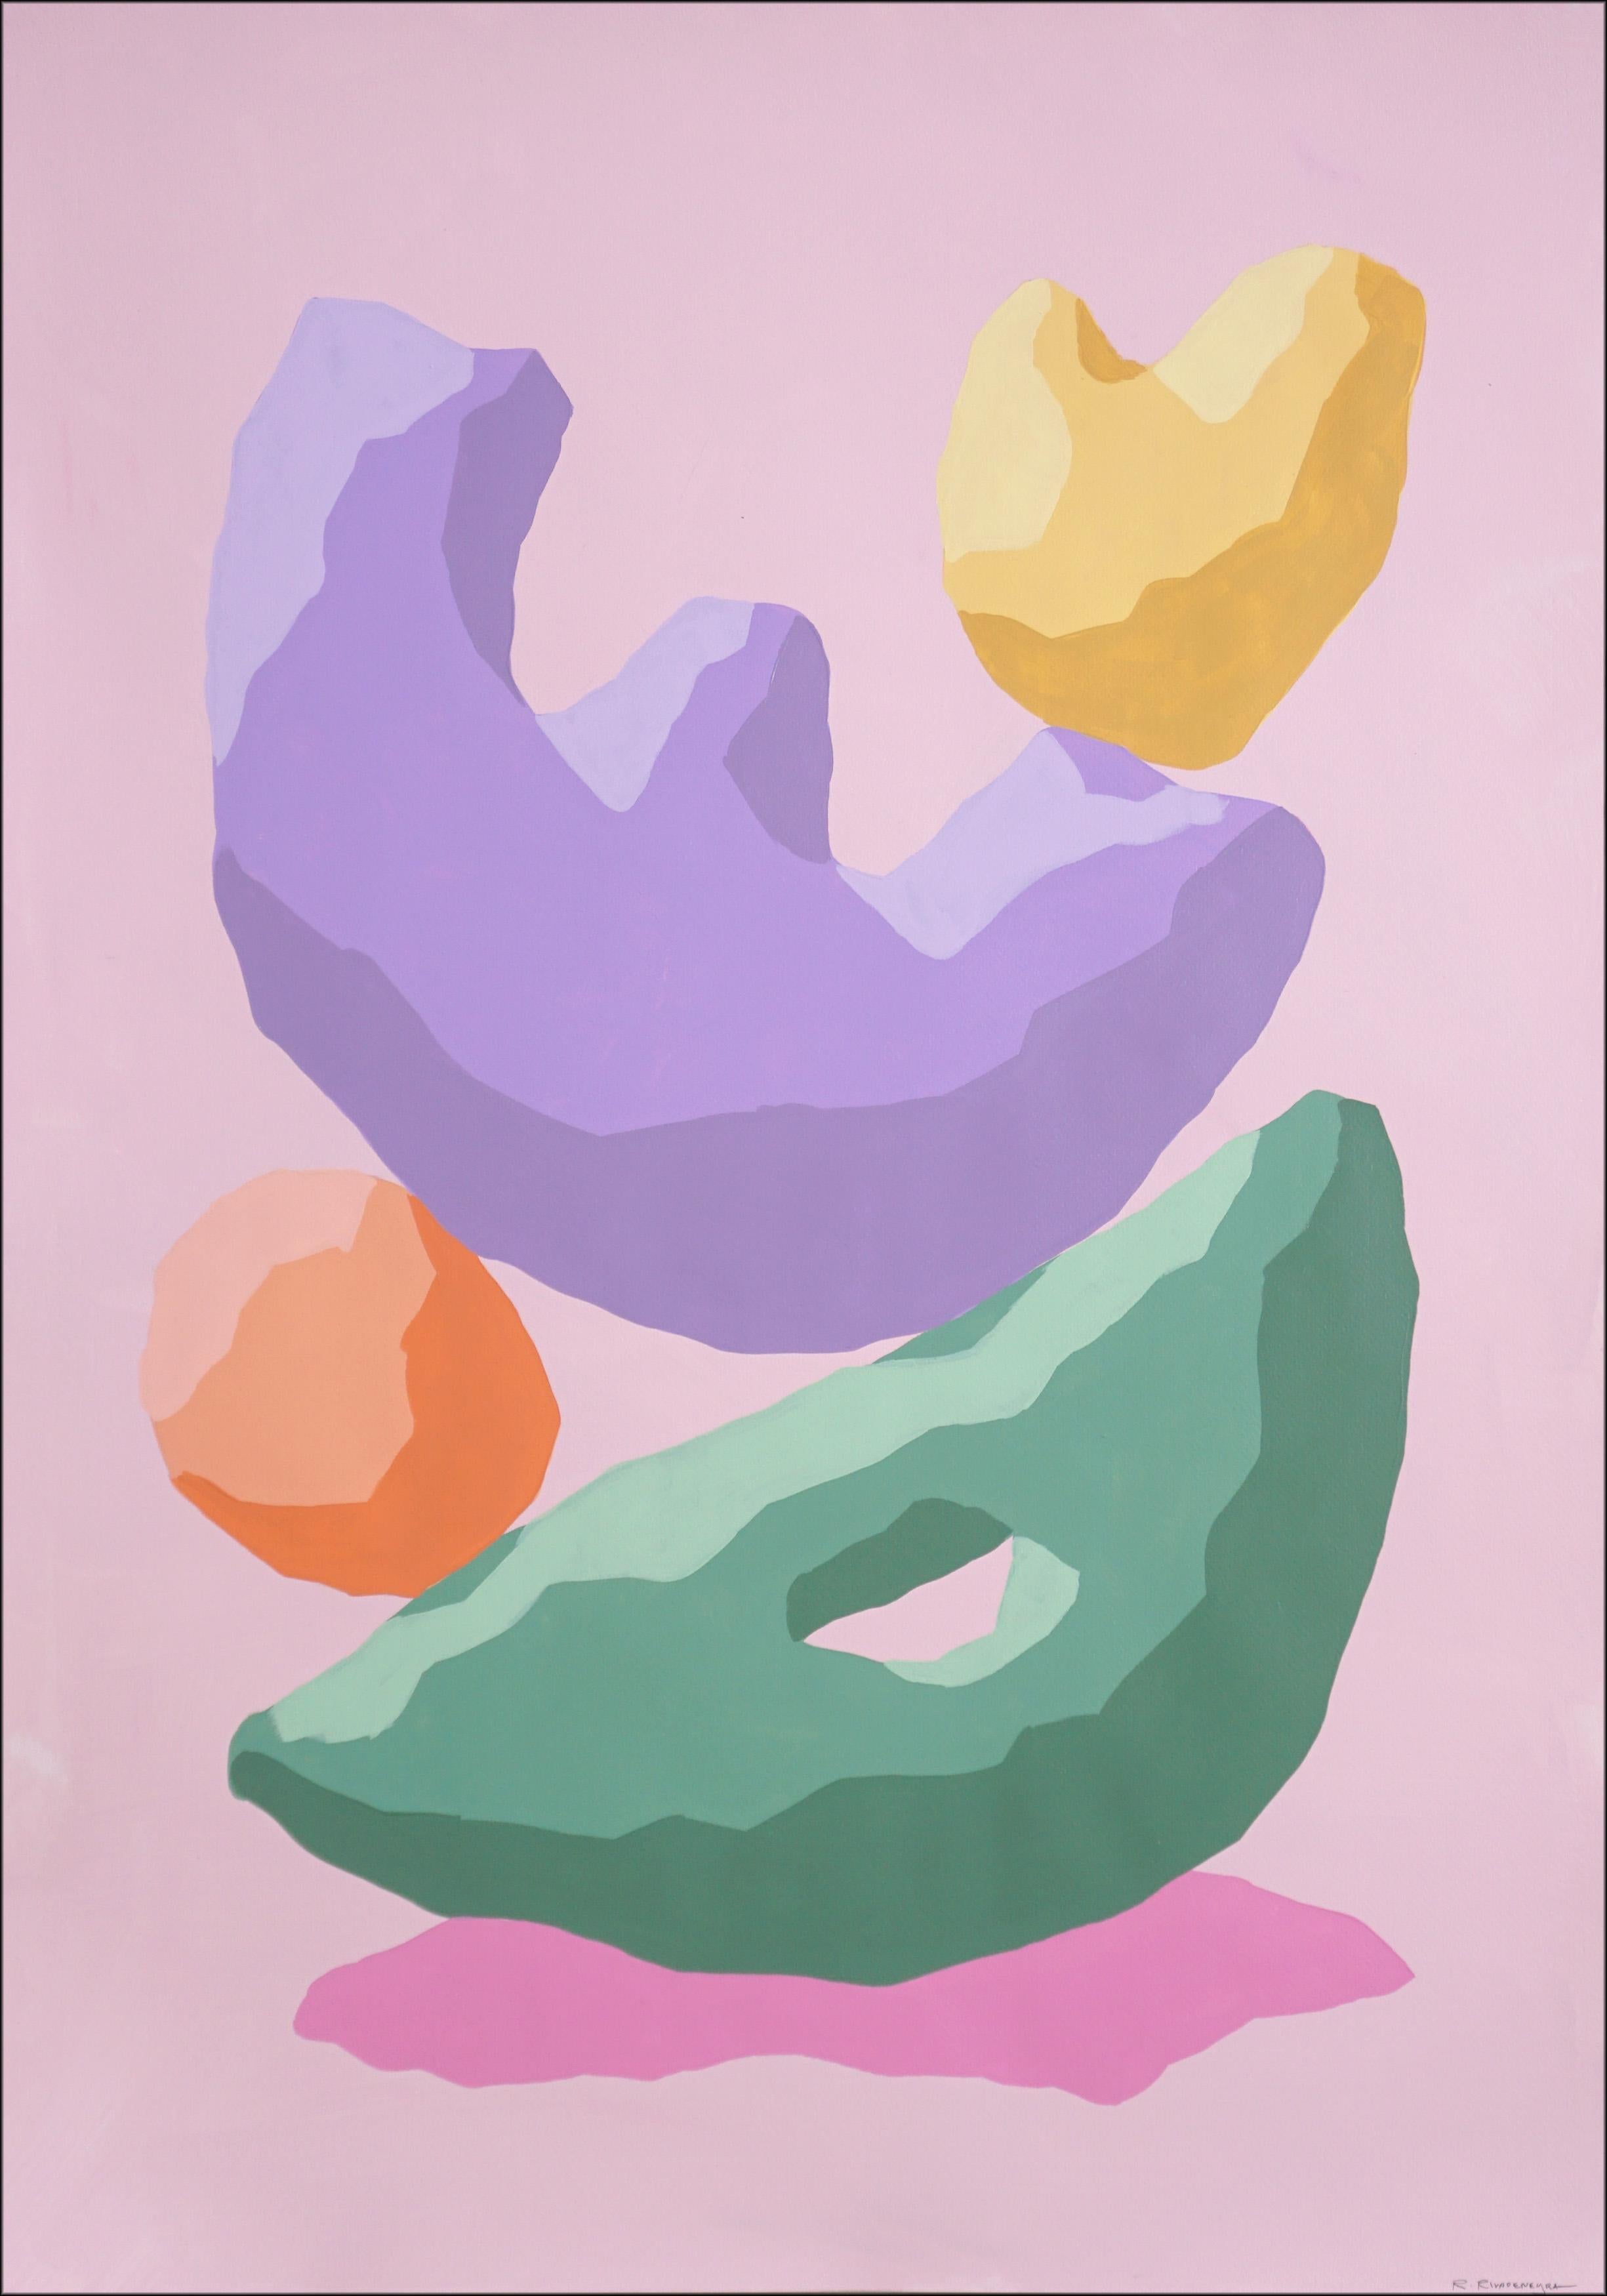 Ryan Rivadeneyra Still-Life Painting - Sublime Stack on Pink, Pastel Tones Contemporary Totem Sculpture, Green, Purple 